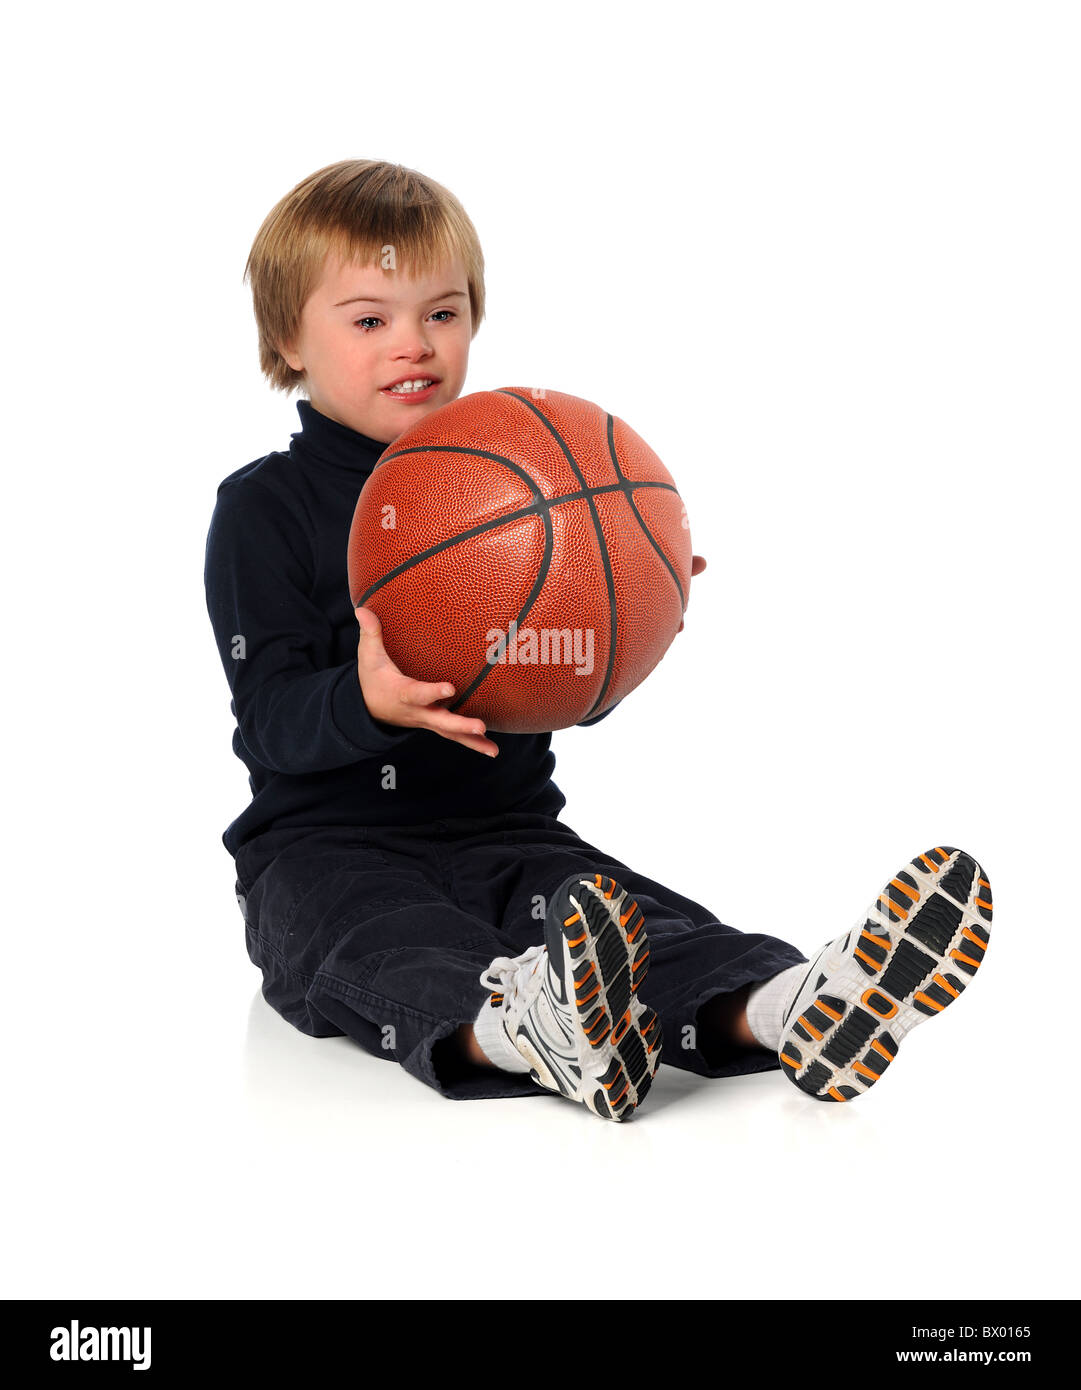 Boy with Down Syndrome playing with basketball over white background Stock Photo